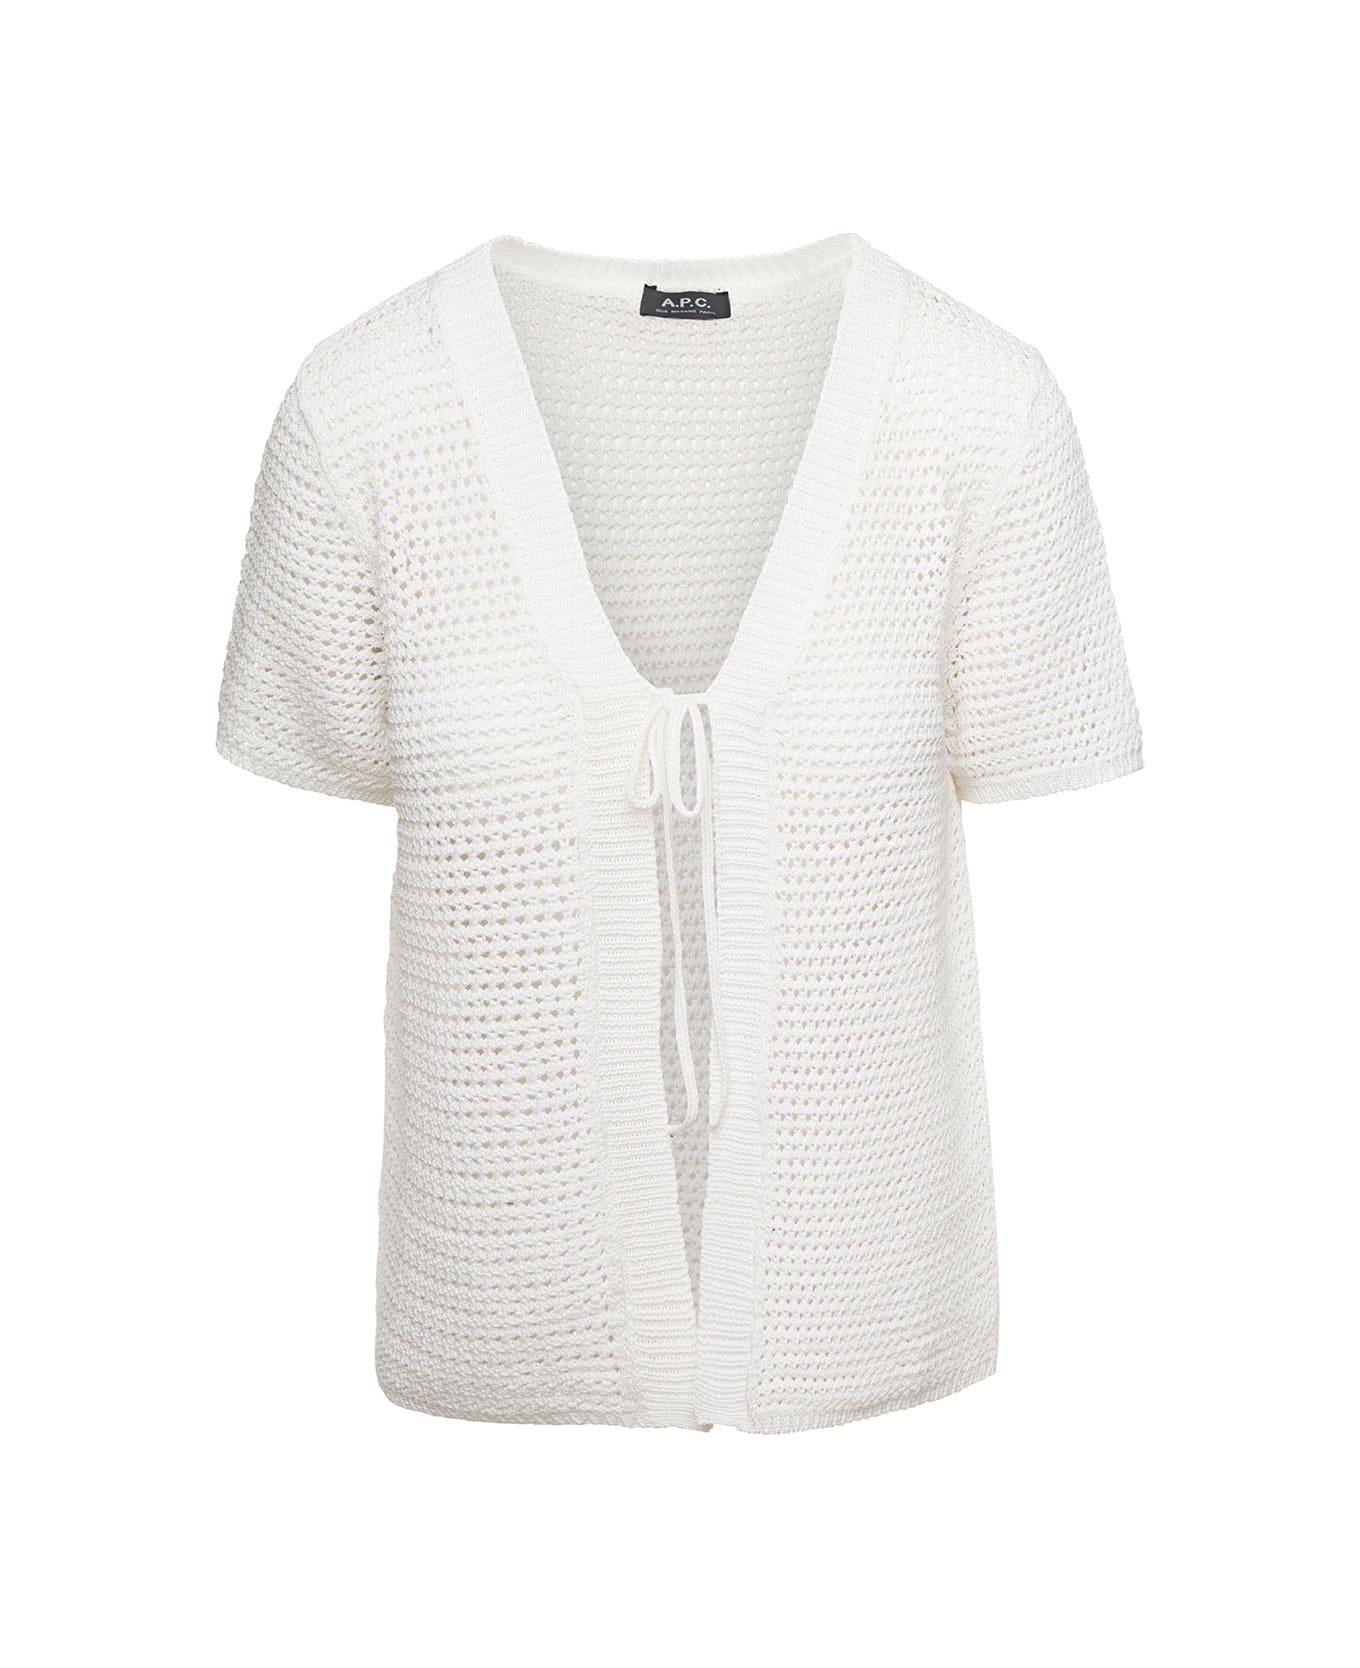 A.P.C. 'maggie' White Short-sleeve Cardigan In Crochet Woman - White カーディガン